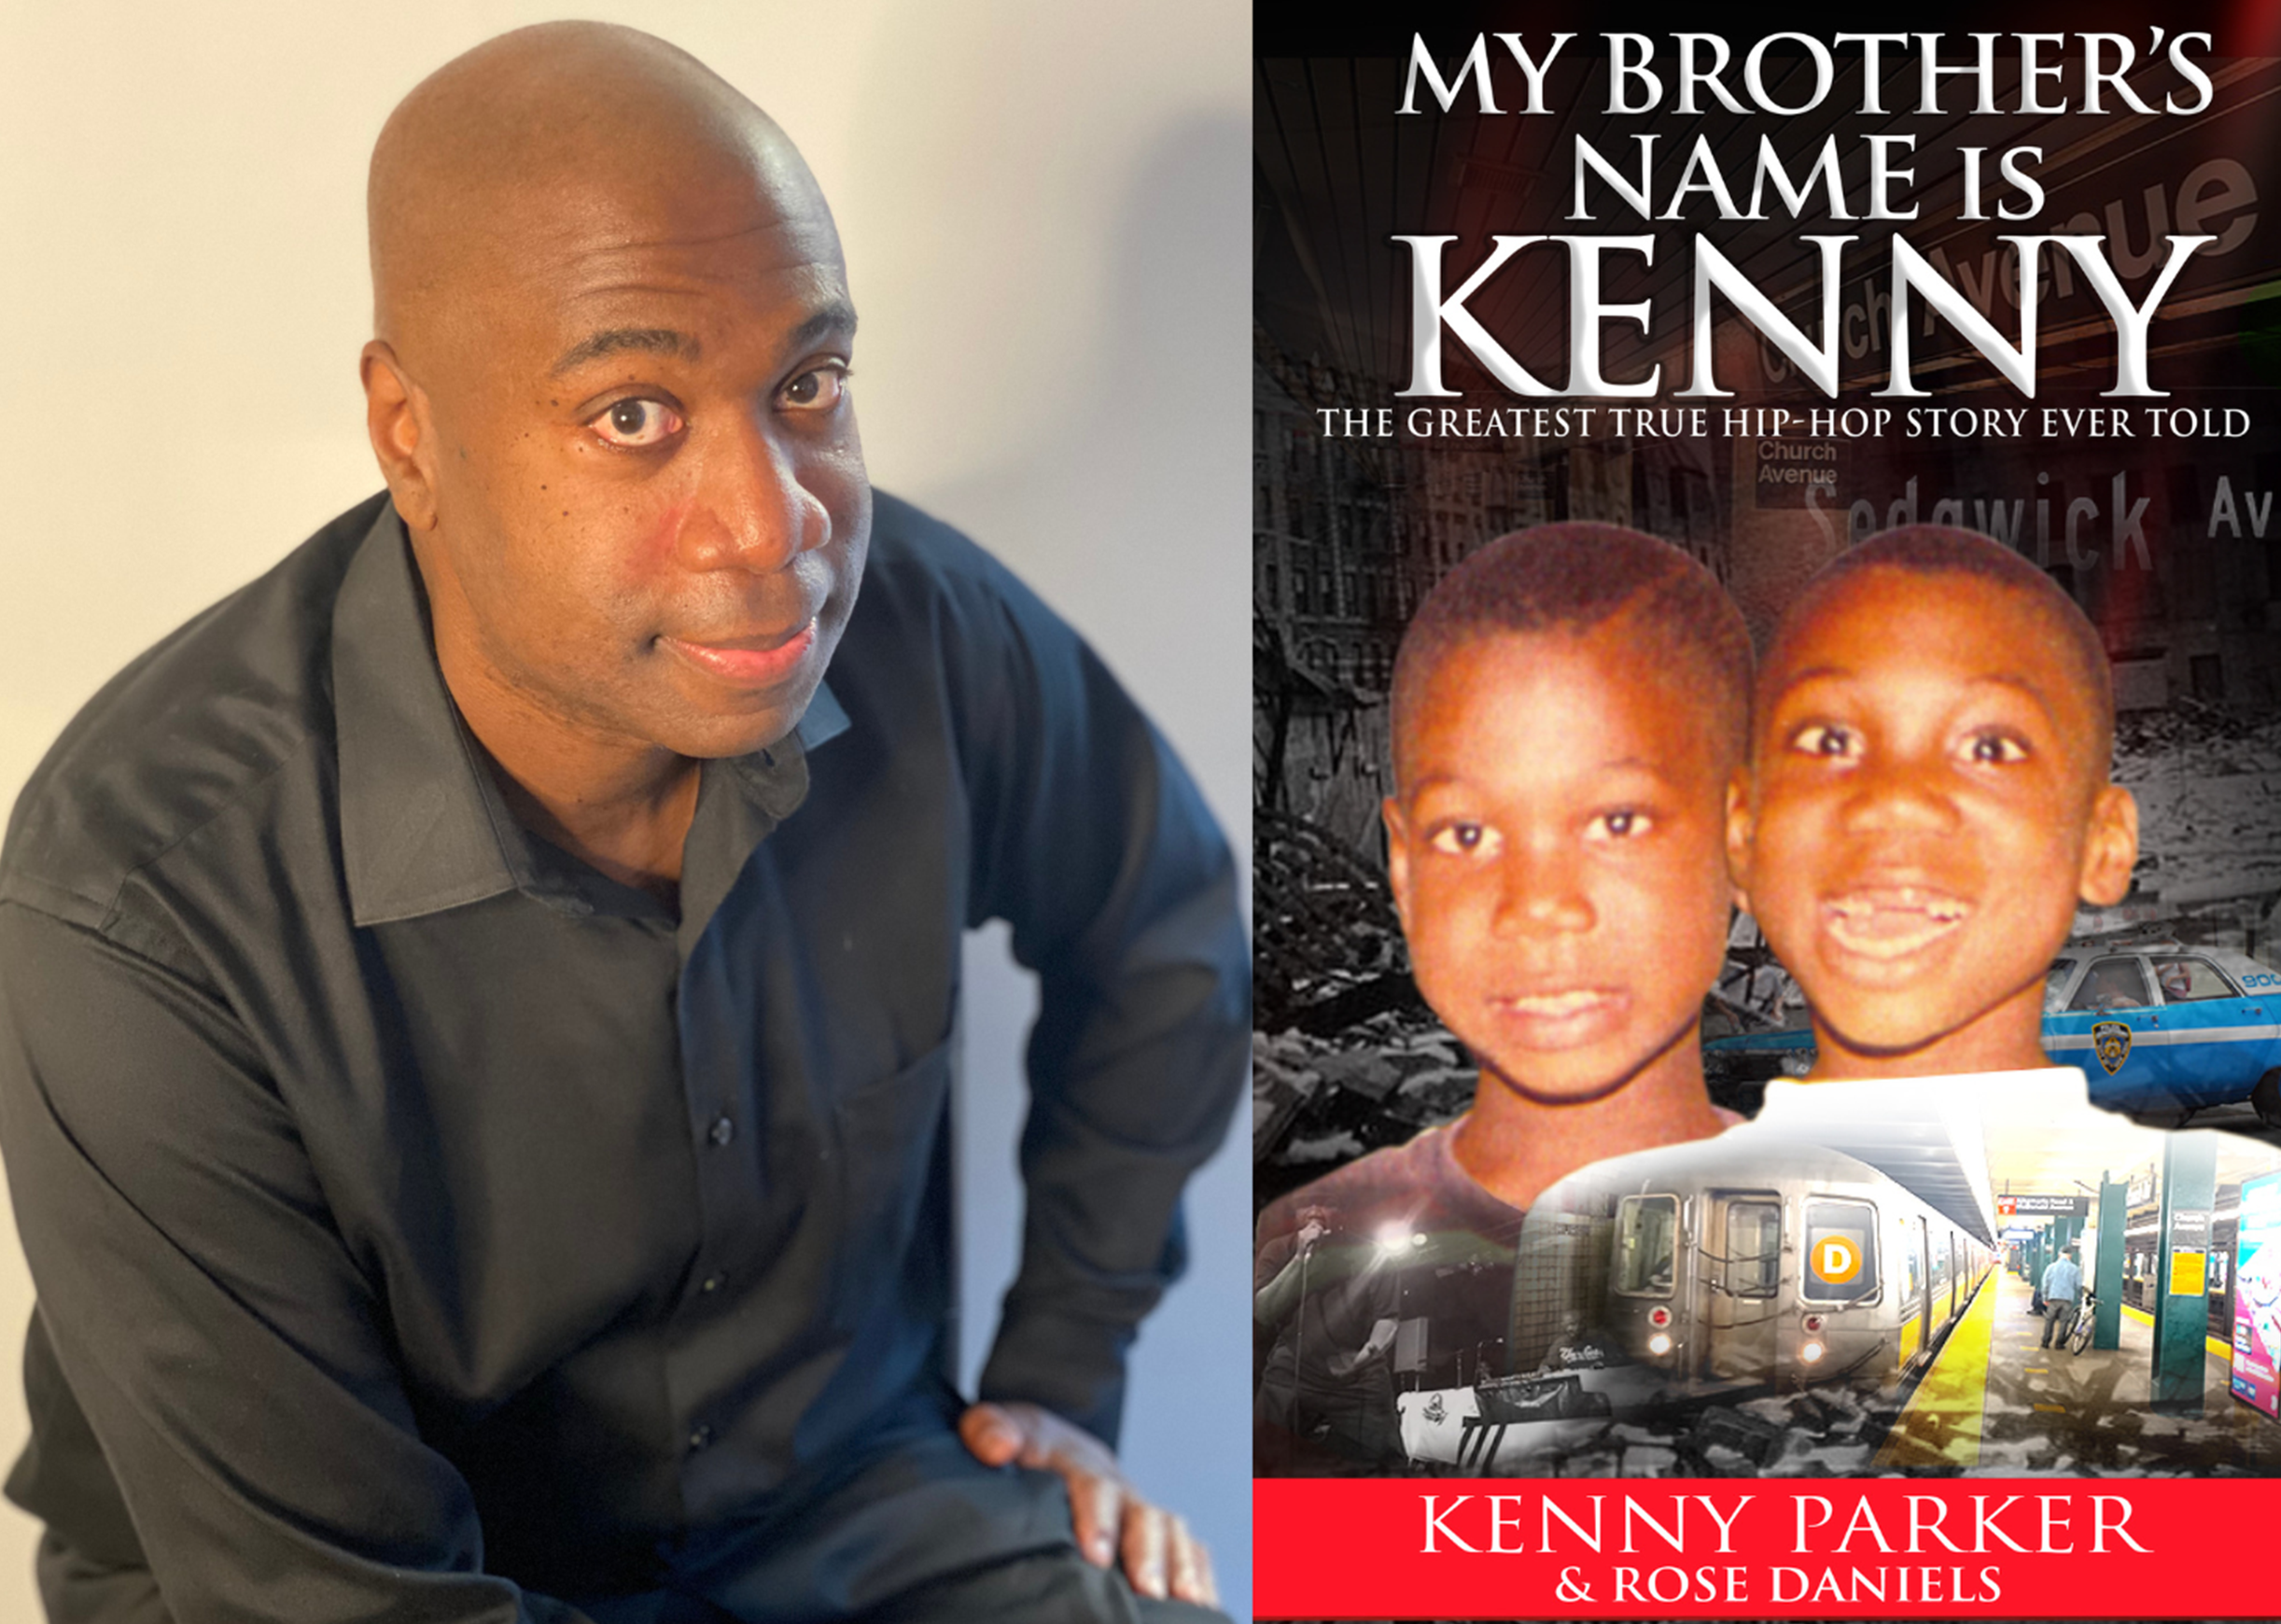 Image Kenny parker (left) Book Cover of "My Brother's Name is Kenny: The Greatest  True Hip Hop Story Ever Told" (right)